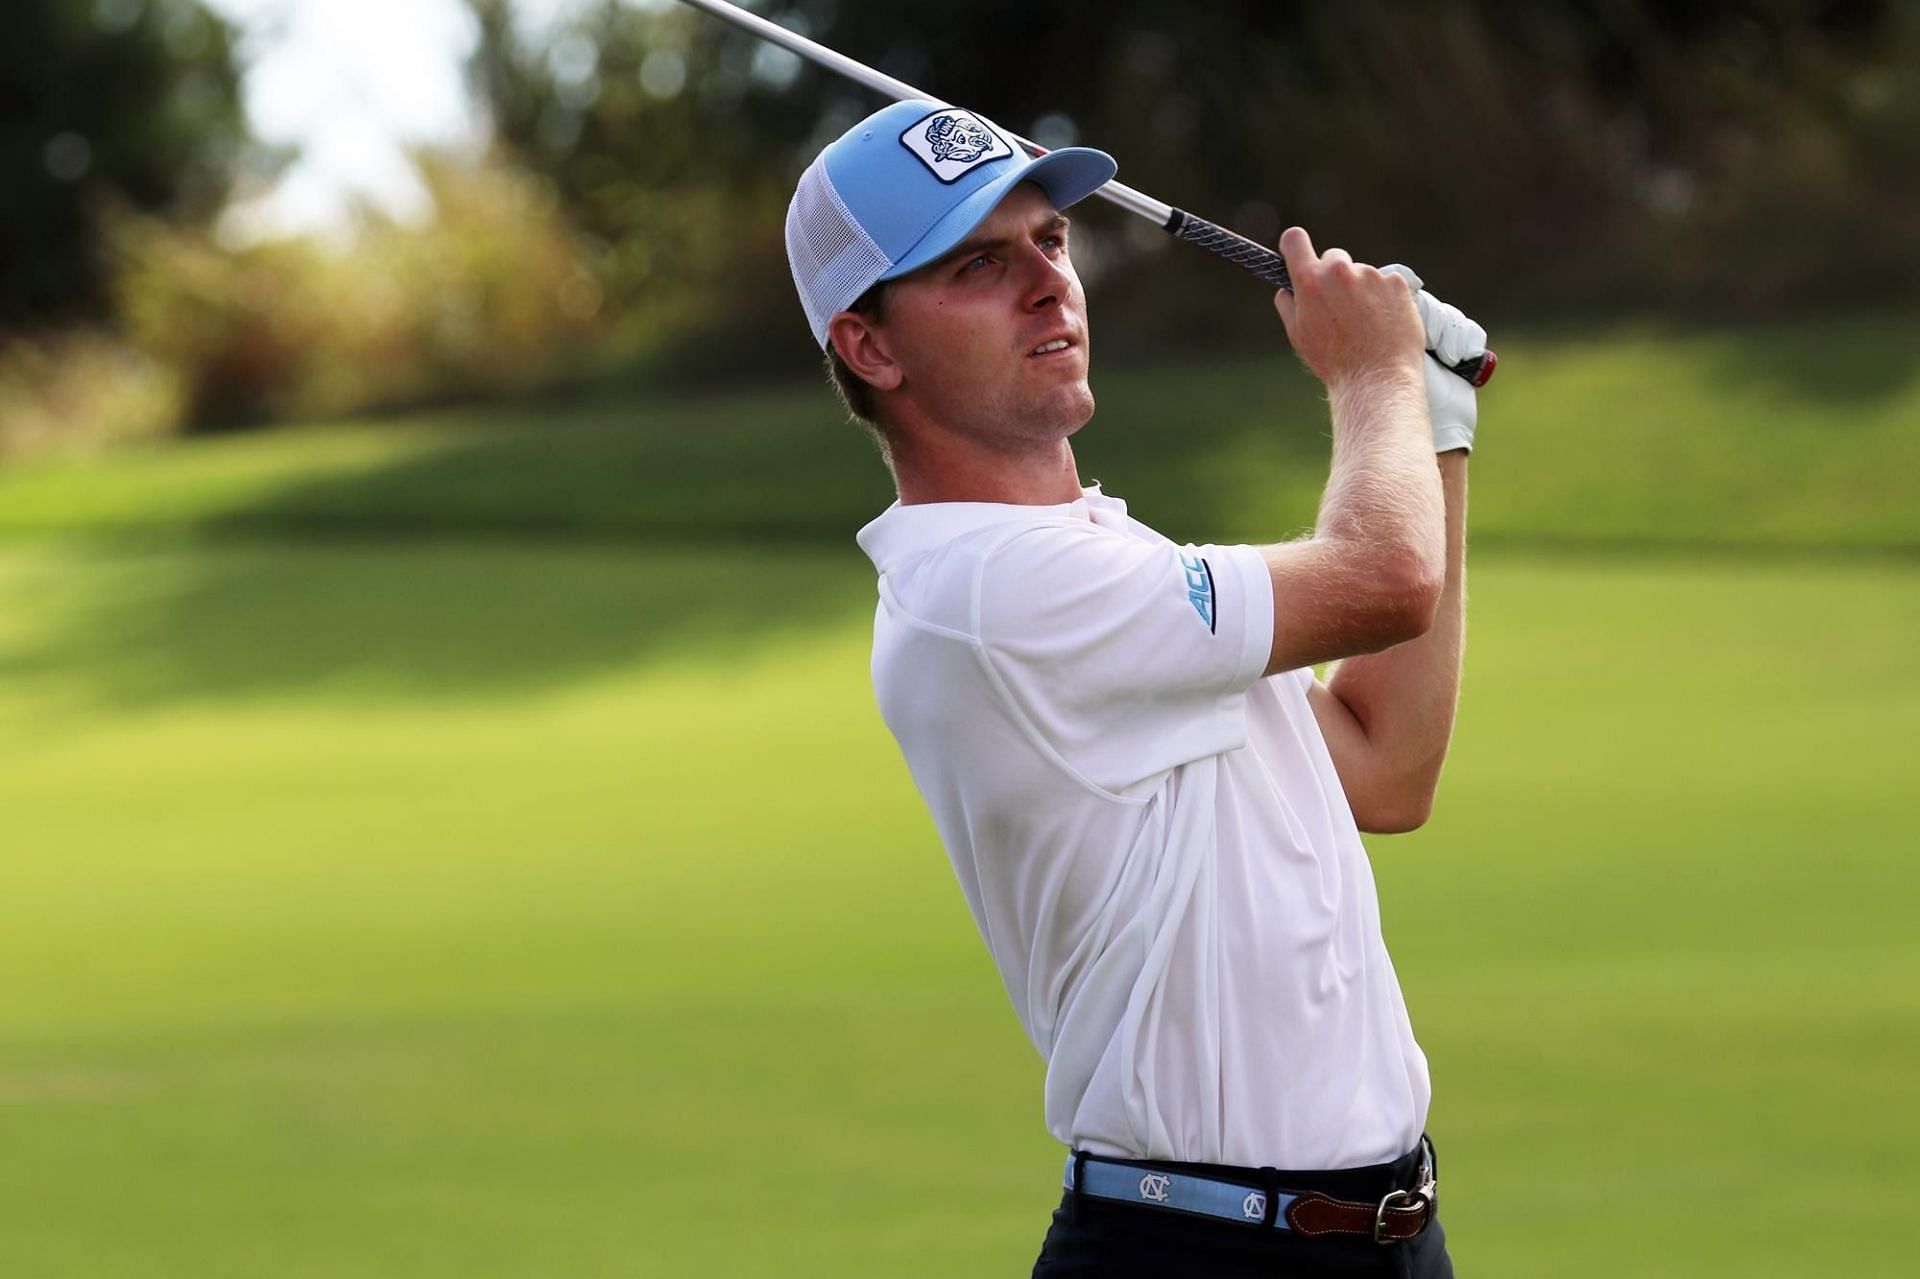 Ryan Gerard had a great run at Honda Classic where he finished at fourth place